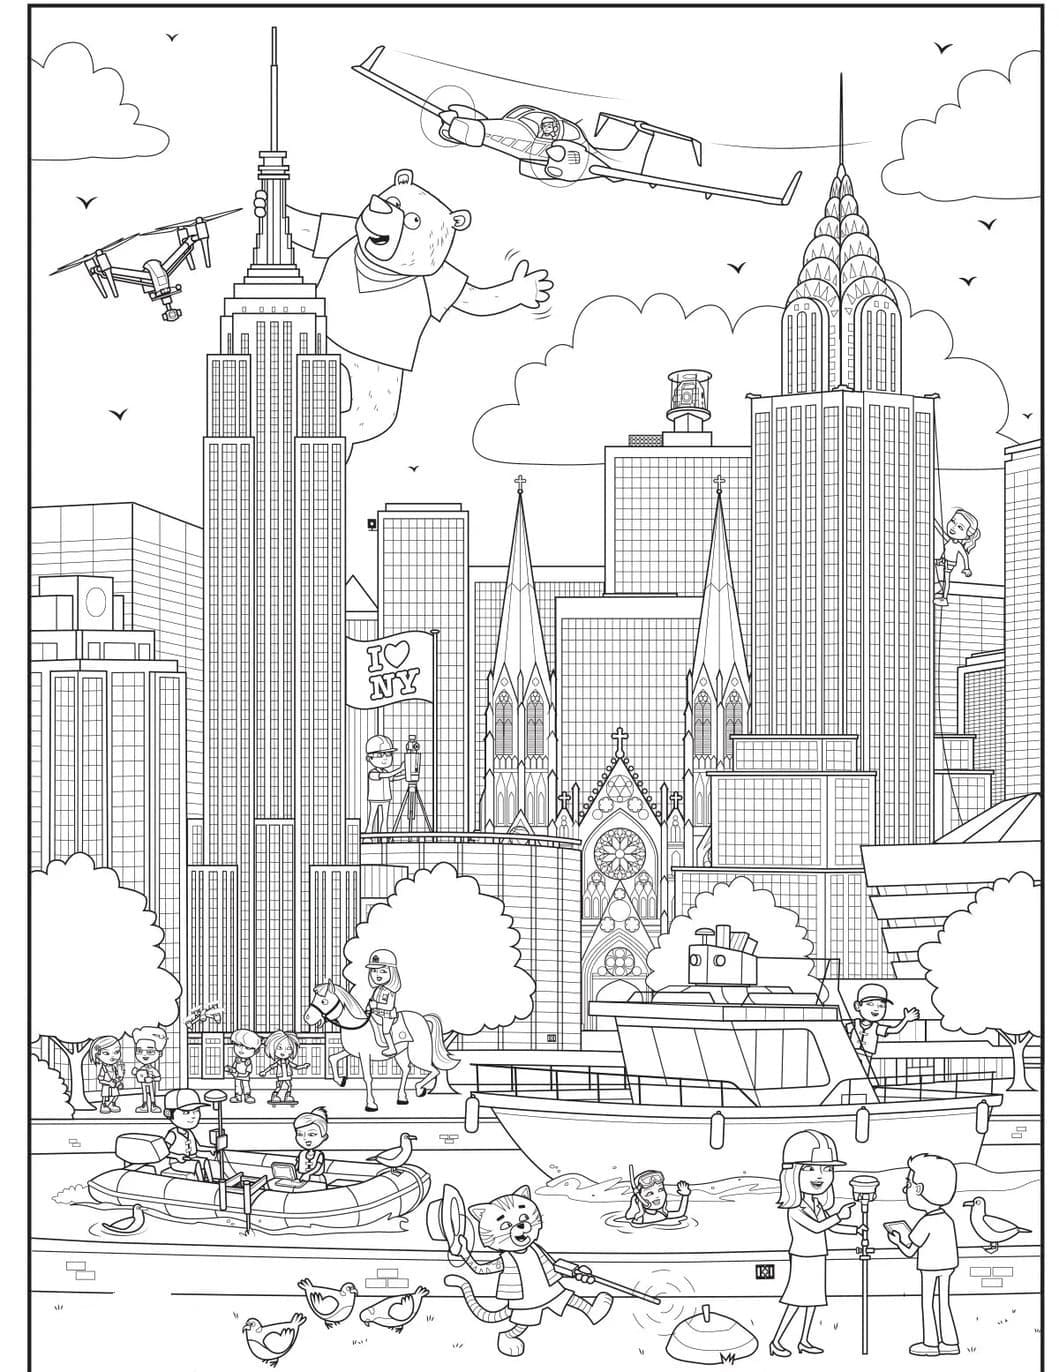 Cute New York City coloring page - Download, Print or Color Online for Free